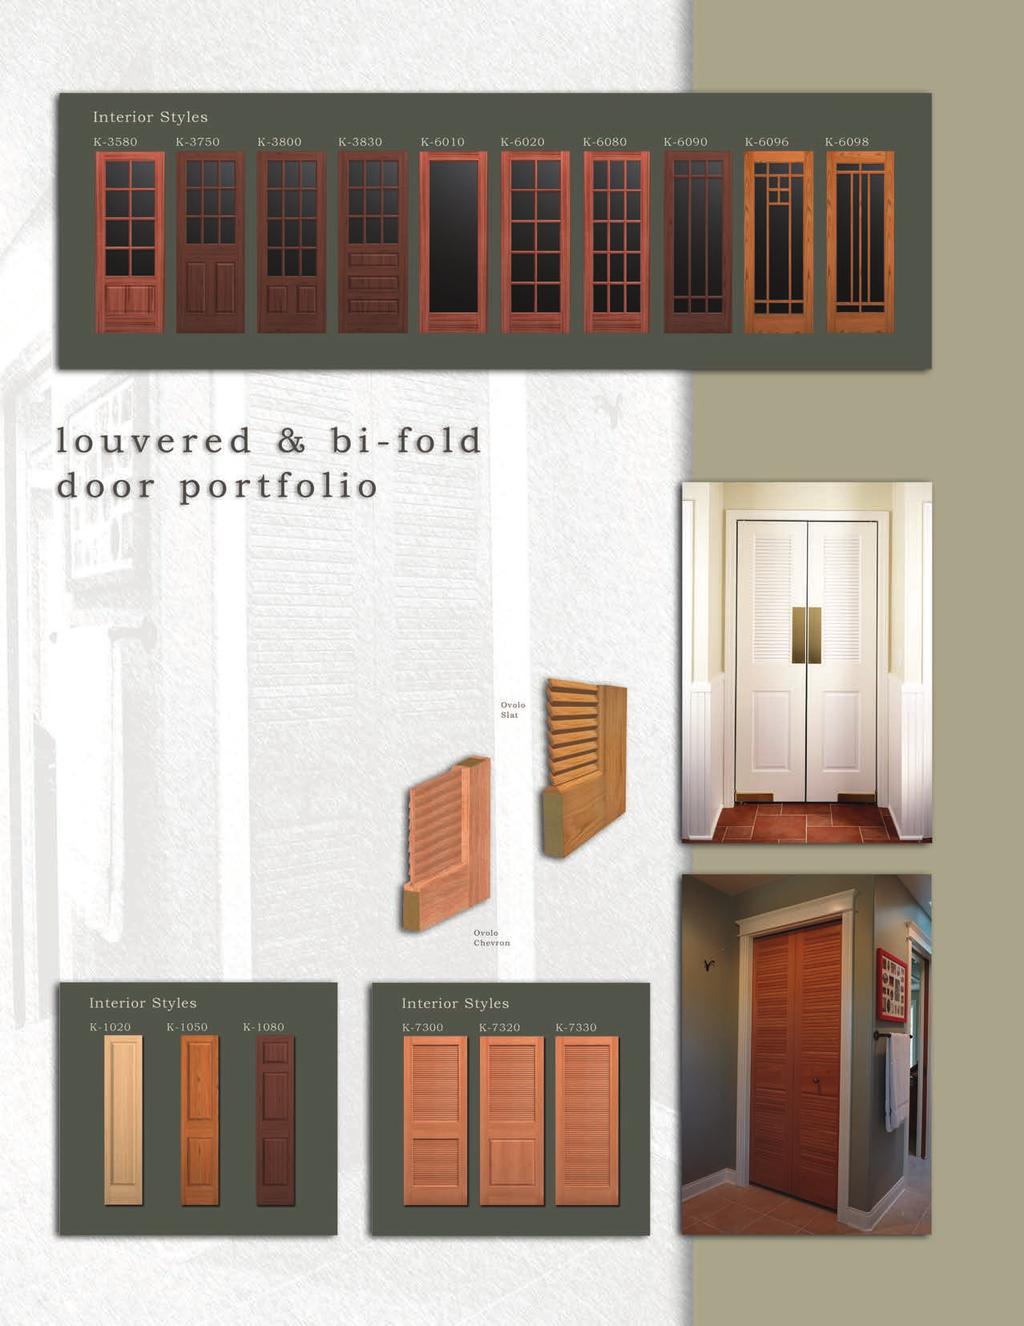 other designs available Add Warmth To Small Spaces Karona louvered and bi-fold doors add an eye-catching touch to any decor. They are ideal for closets, pantries and utility spaces.